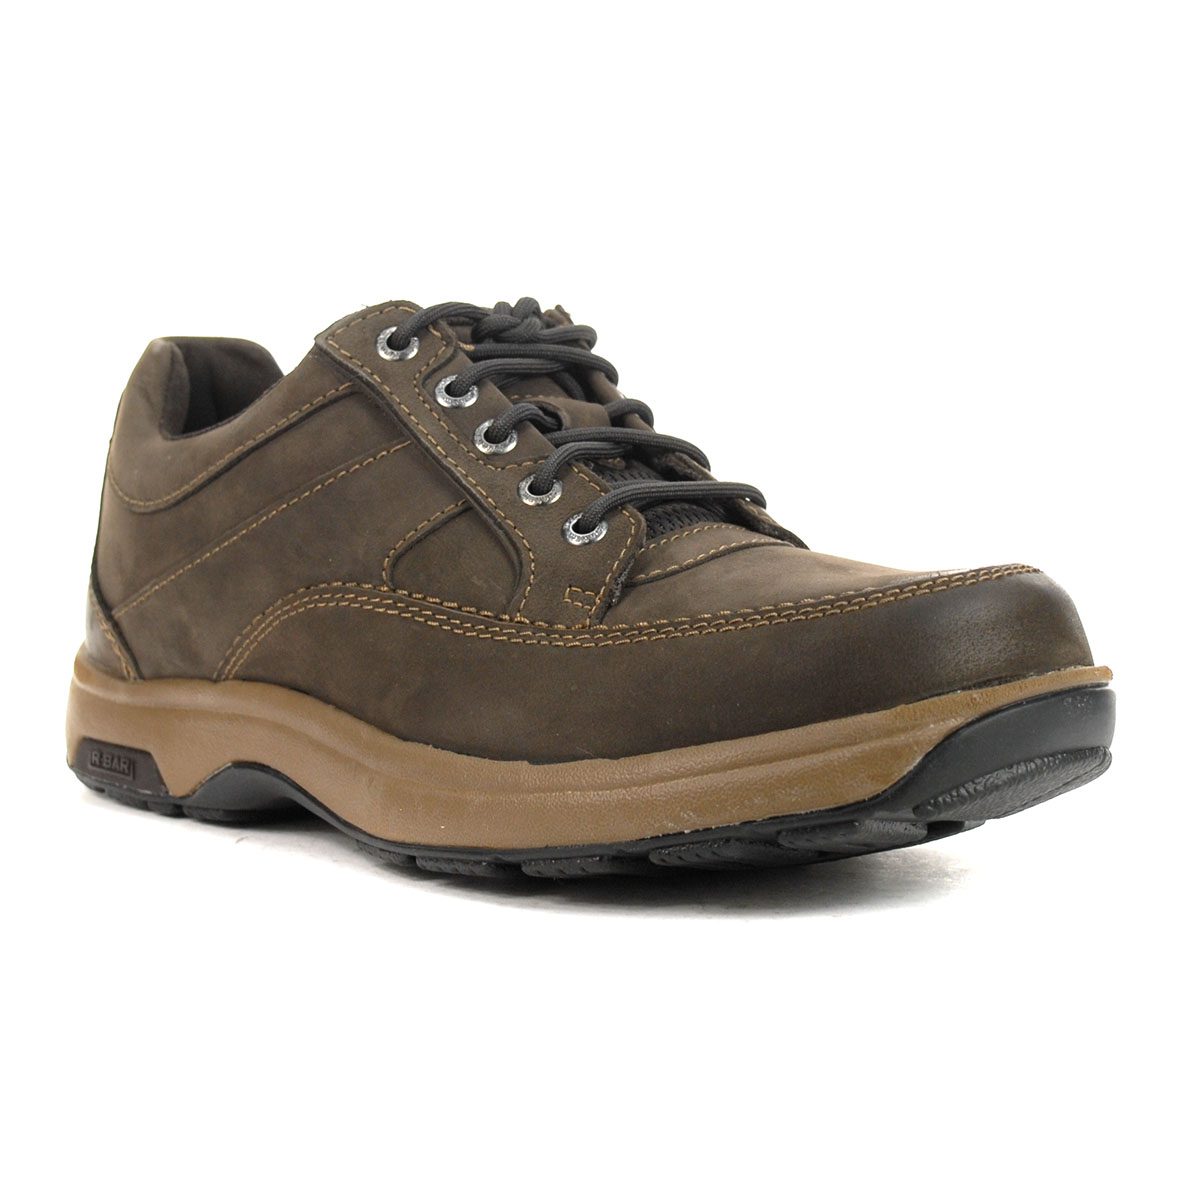 Dunham Men's 8000 Midland Brown Lace Up Shoes CH3005 - WOOKI.COM